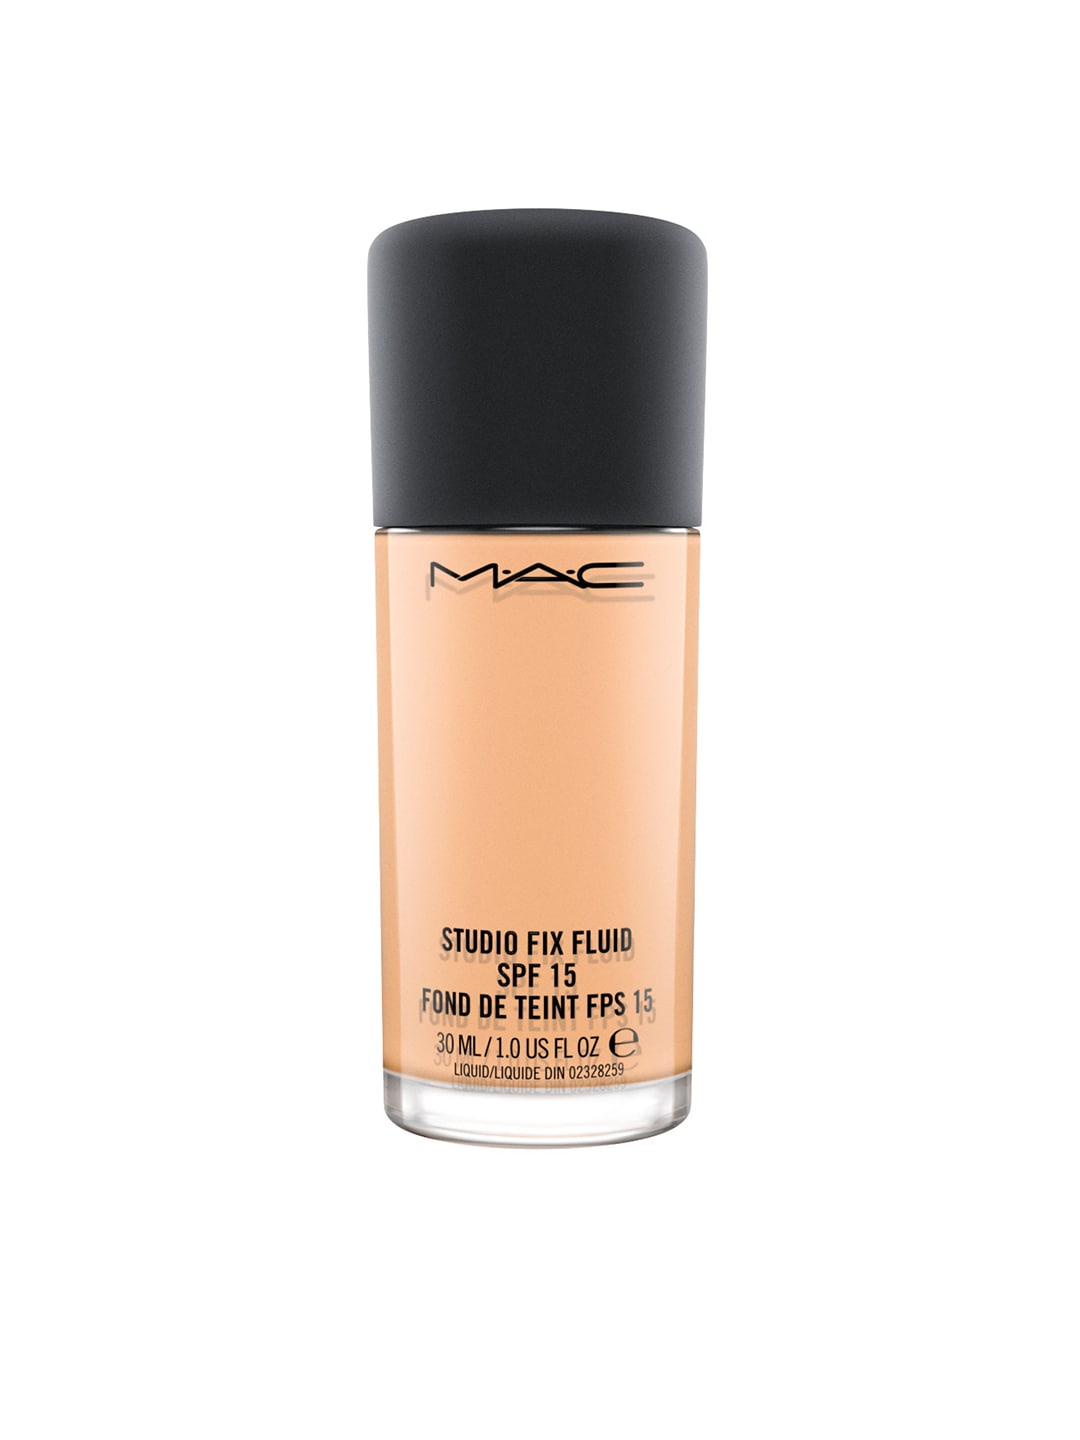 M.A.C Studio Fix Fluid Broad Spectrum Foundation with SPF 15 - N6.5 30ml Price in India